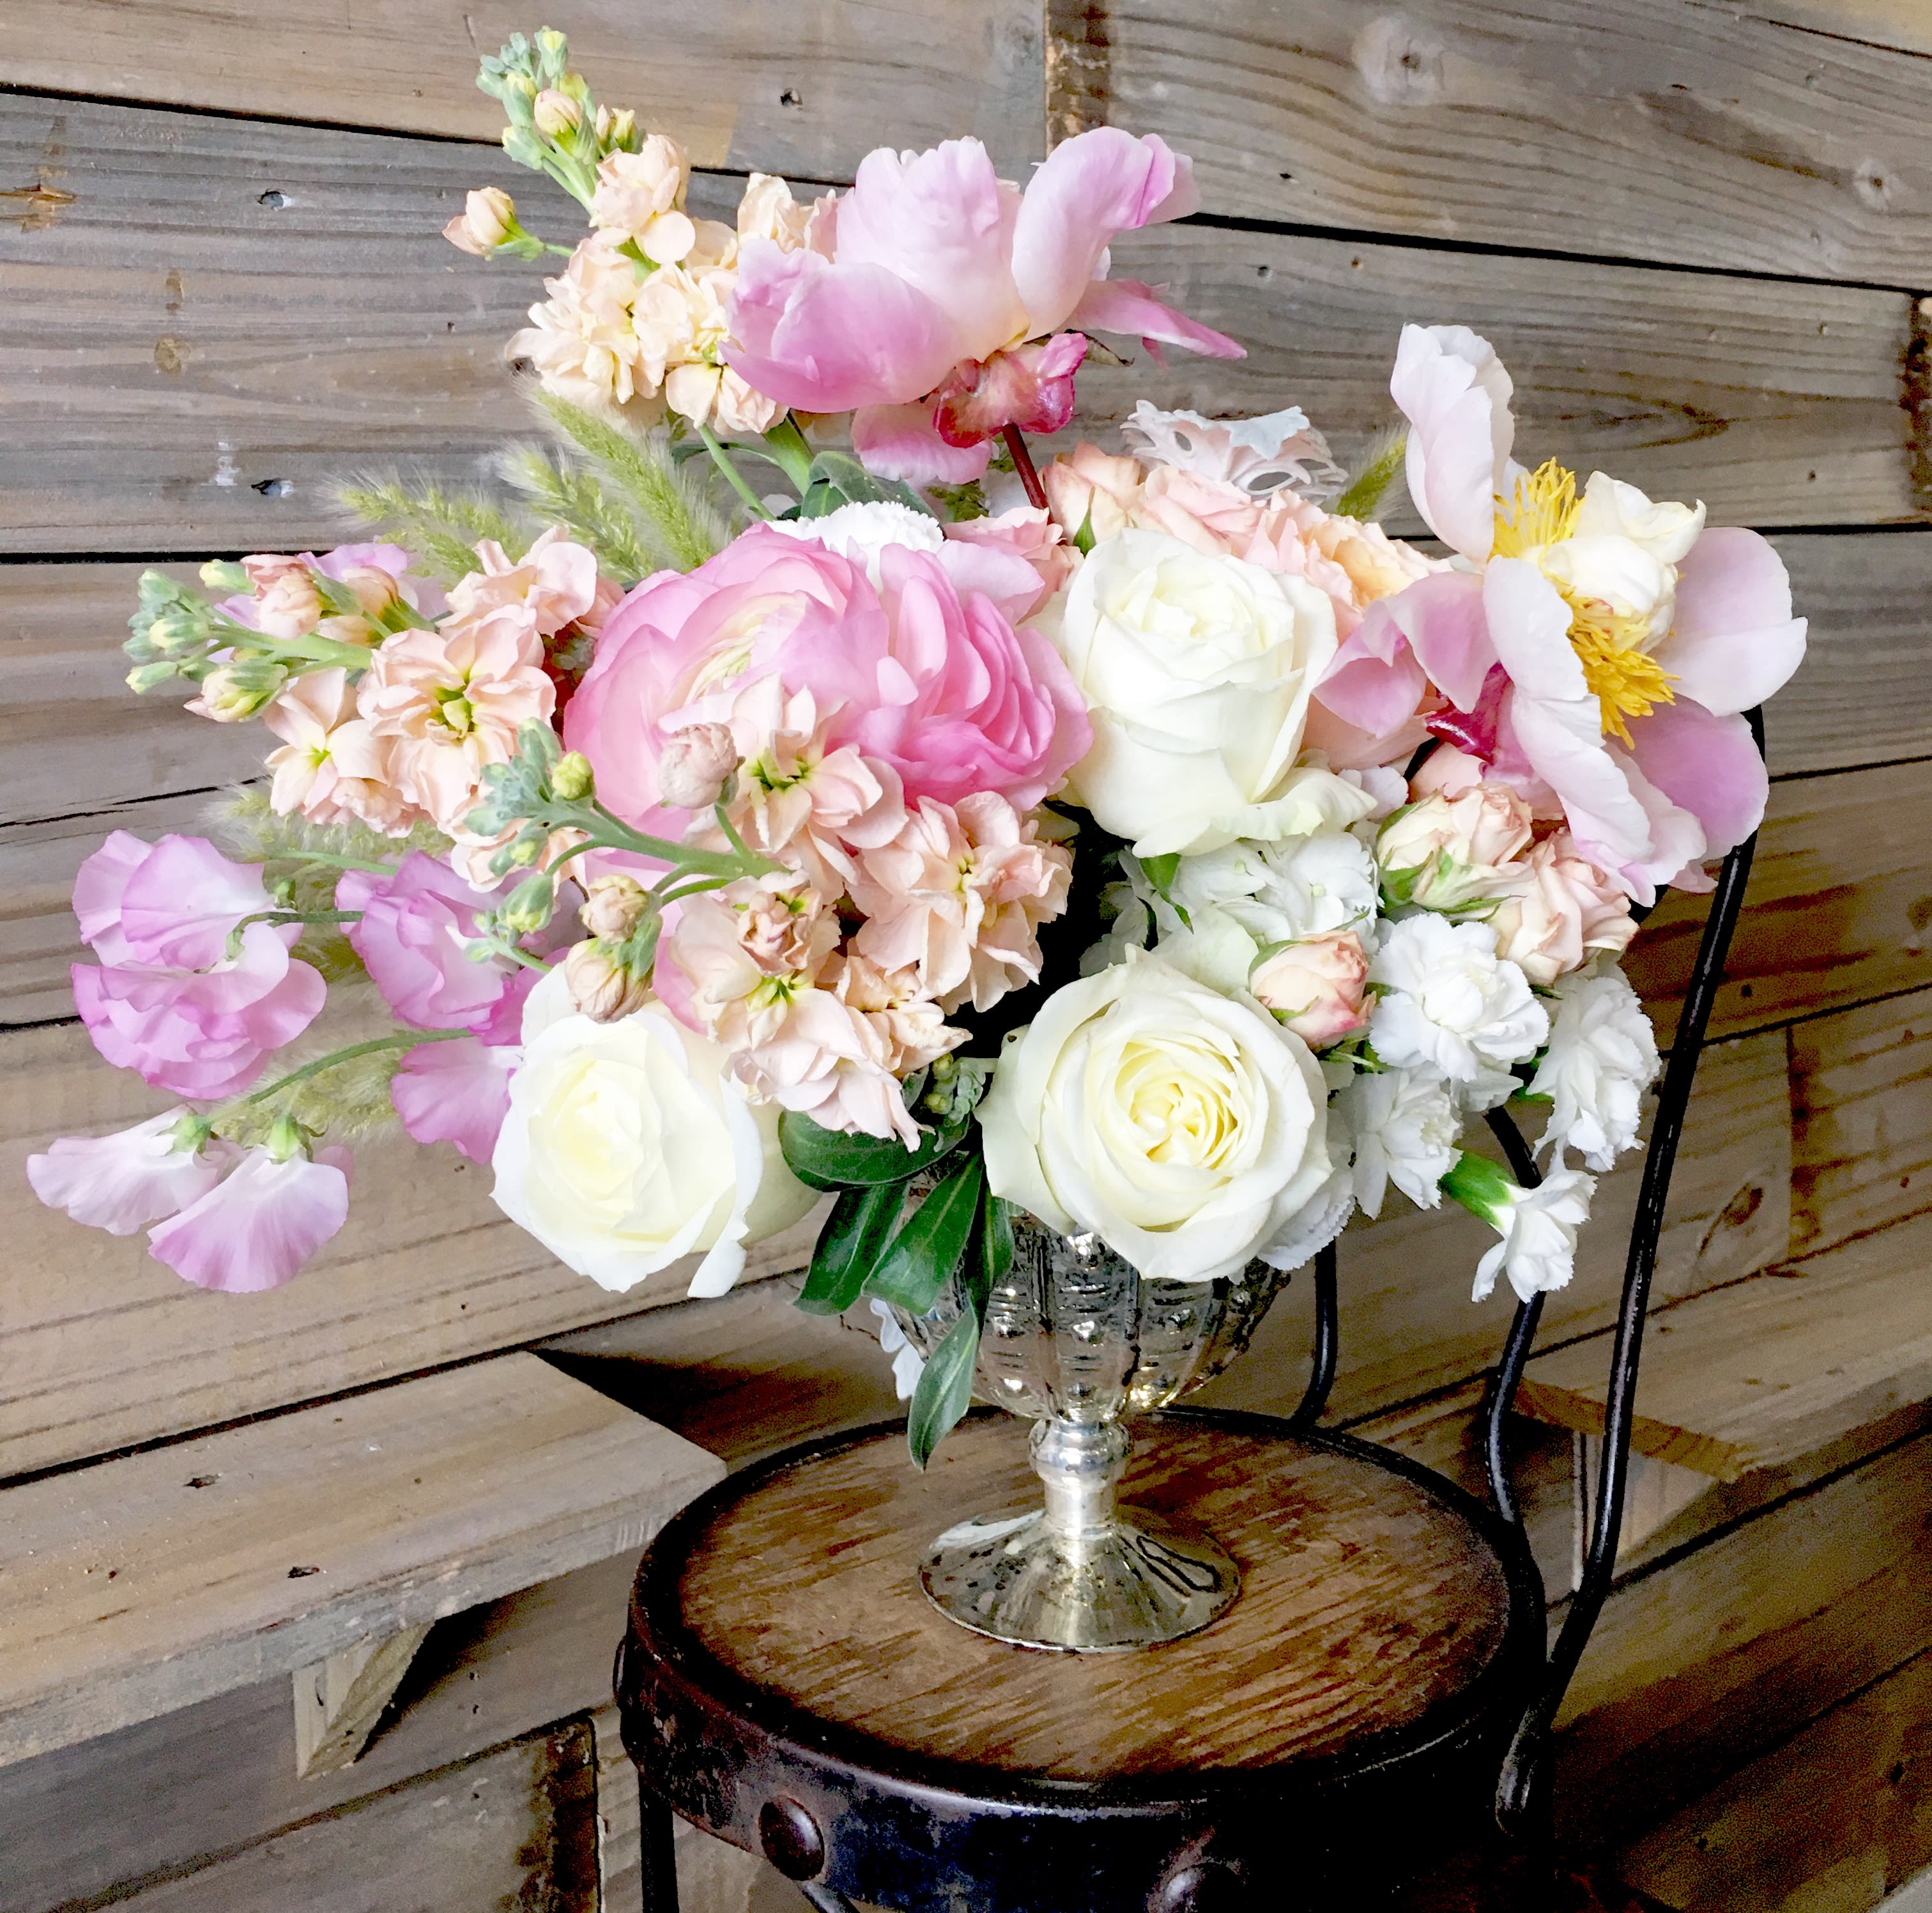 Lush Compote Arrangement In Soft Flowers In Kitty Hawk Nc Bells And Whistles At The Flower Field,Strawberry Wine Song